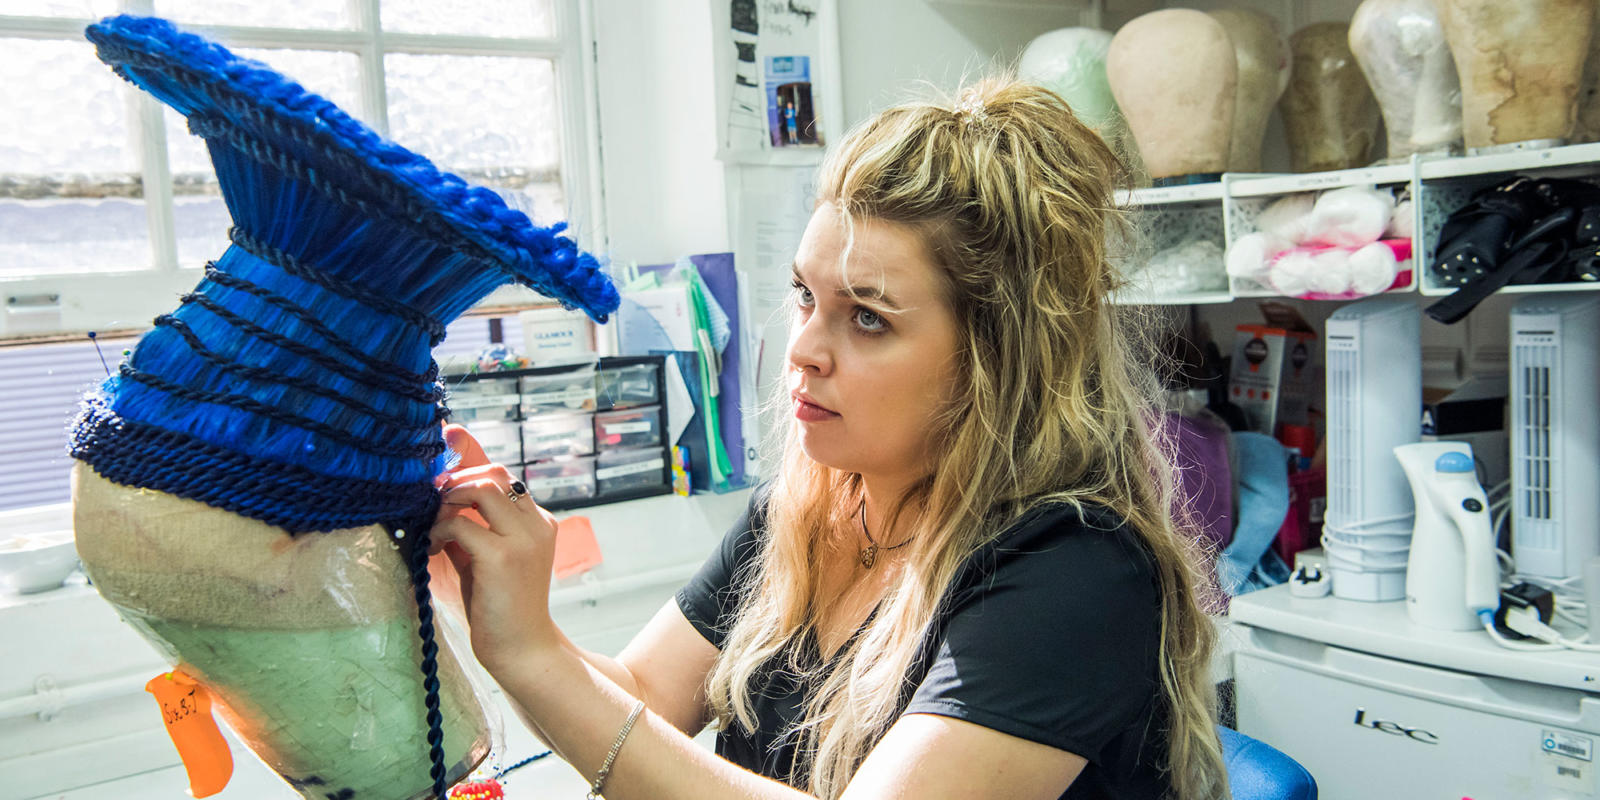 Woman creating a blue headset for Aida in ENO's costume department